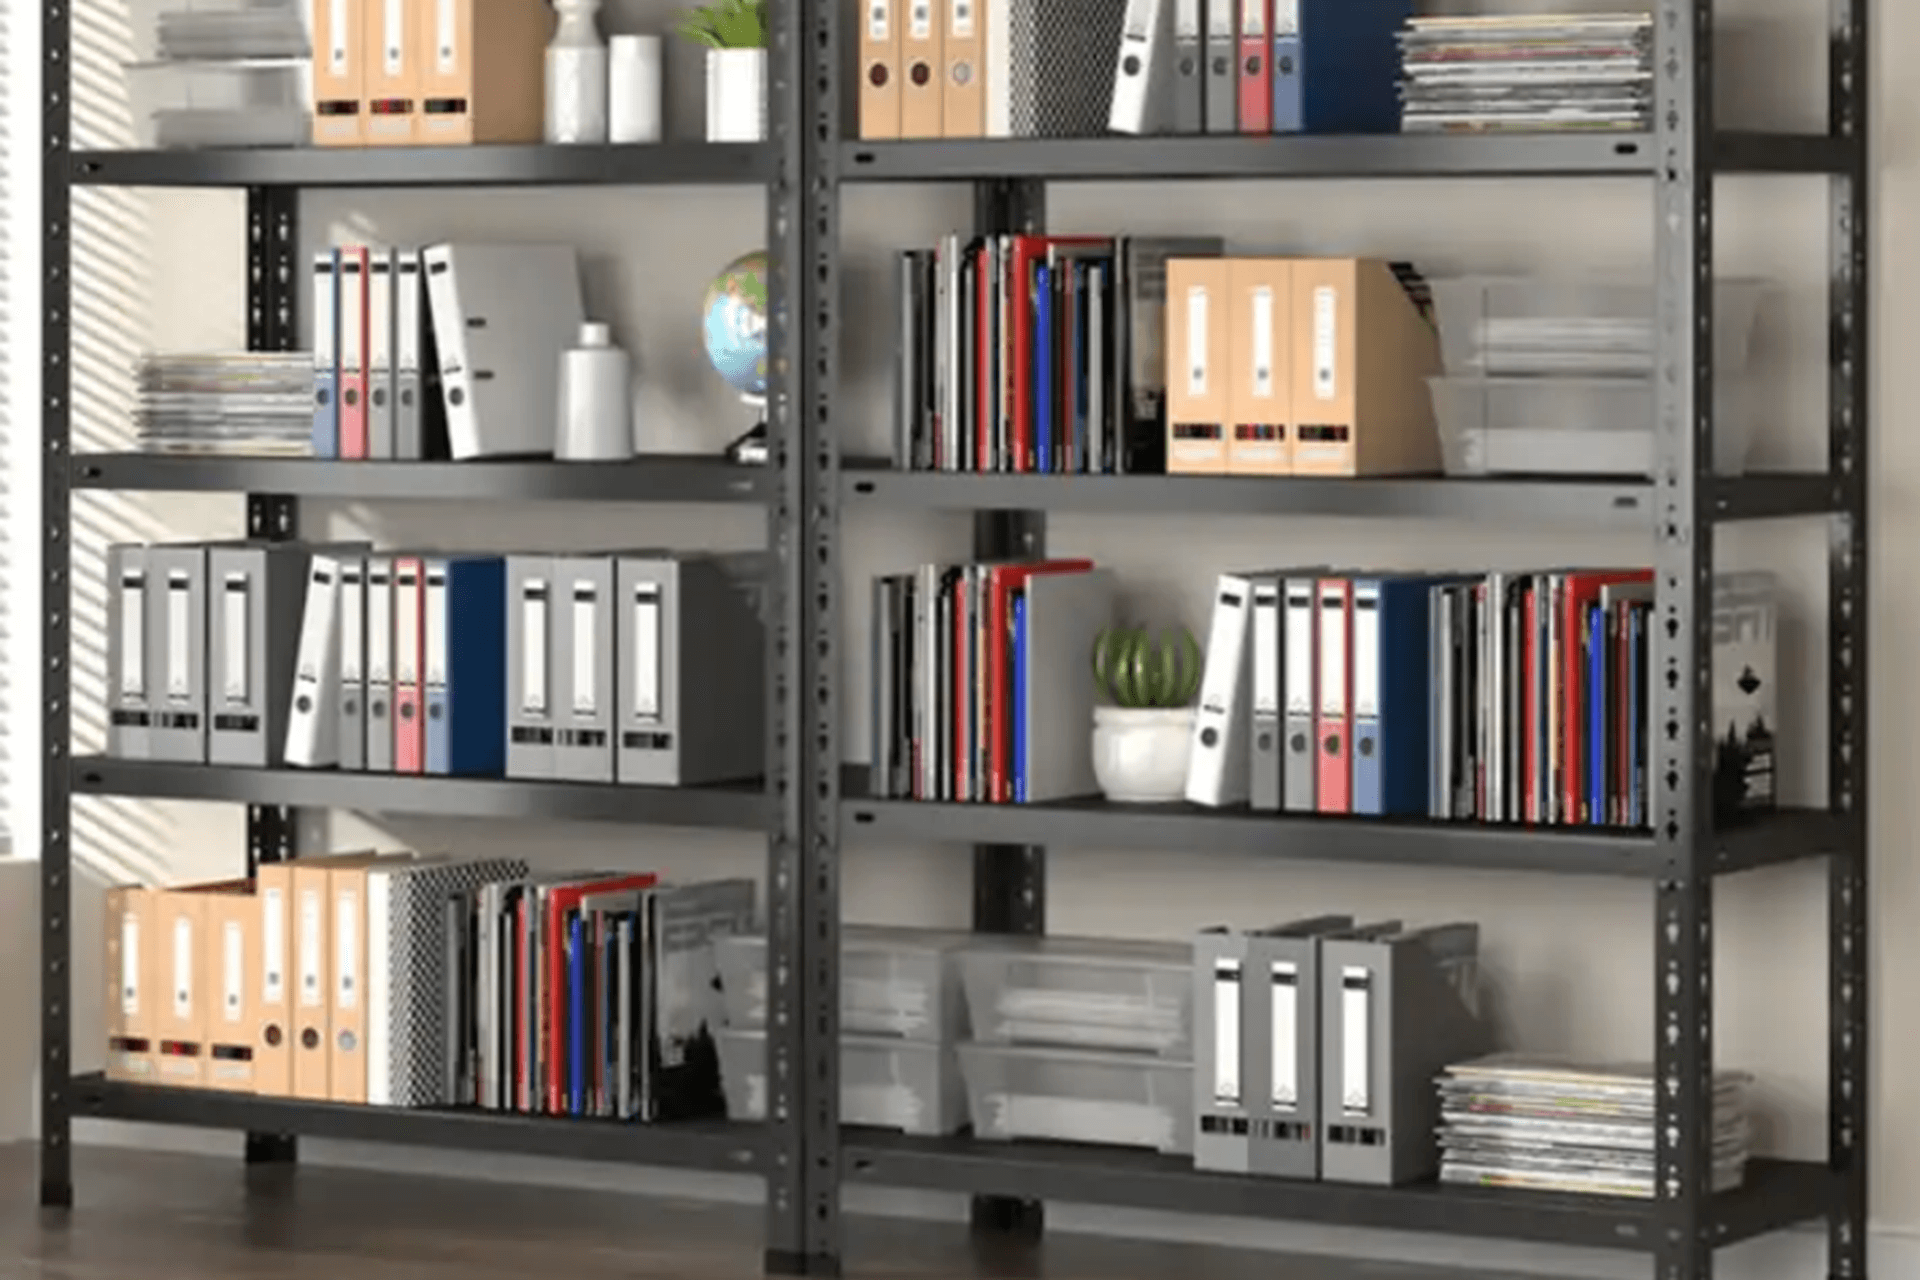 Bolted storage shelves